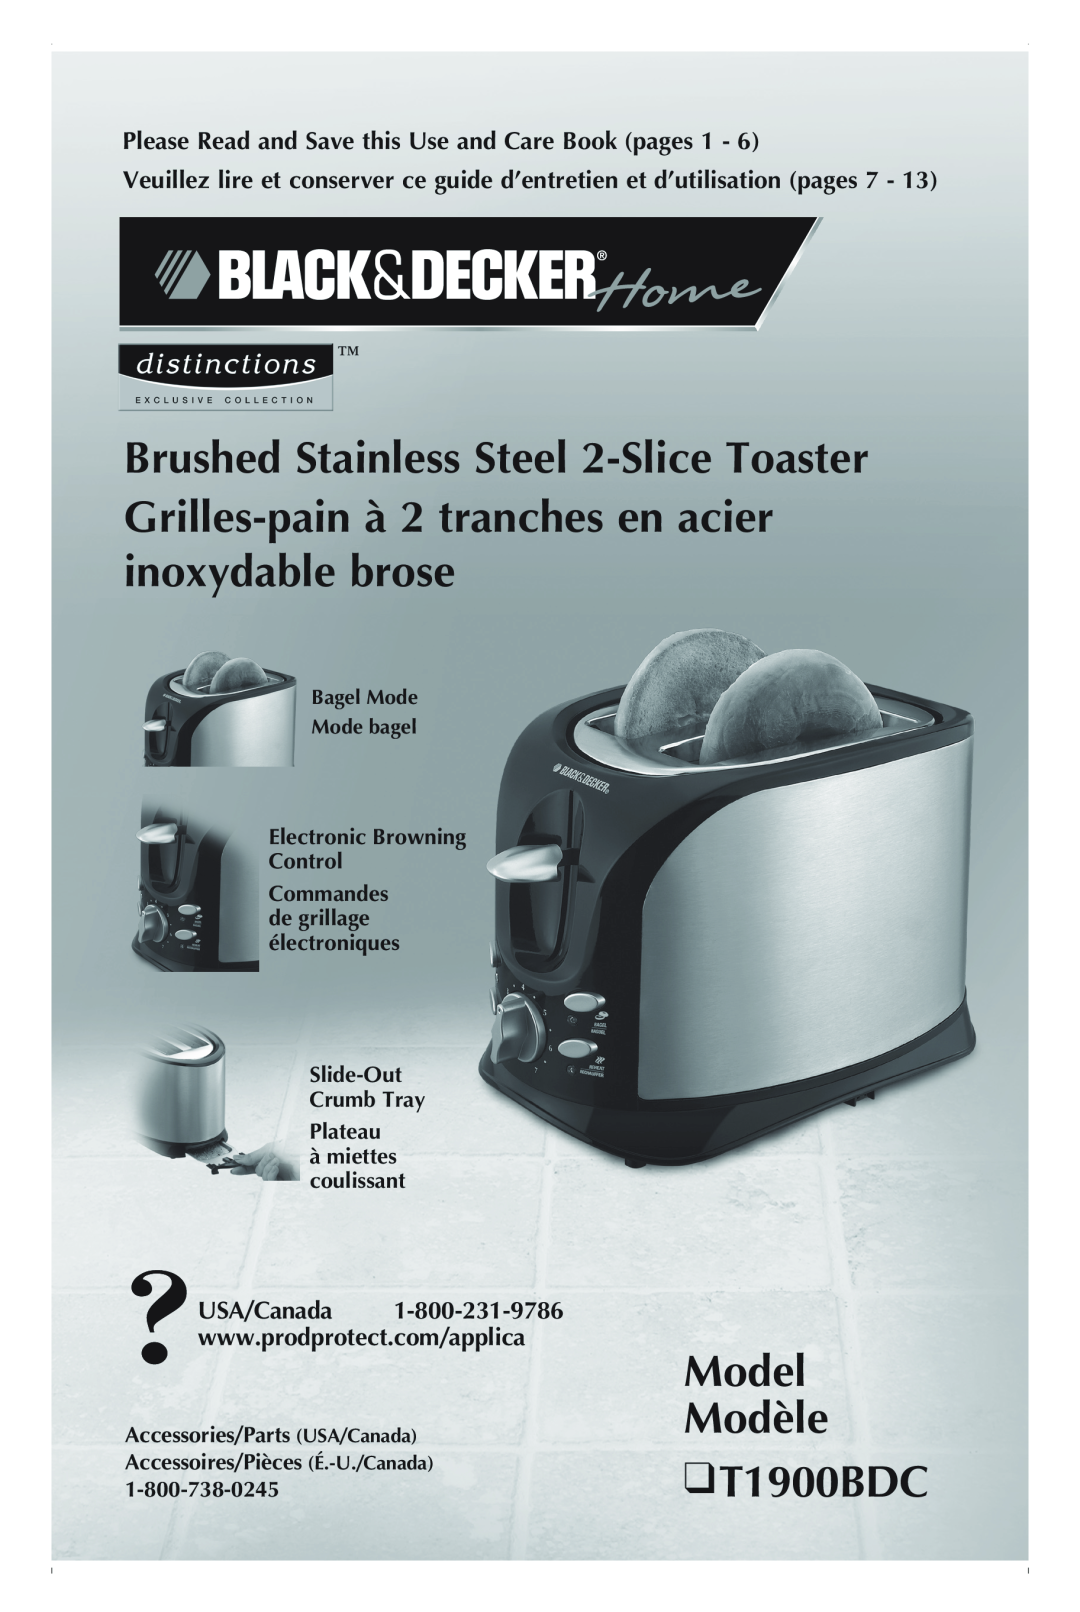 Black & Decker manual Model Modèle T1900BDC, Please Read and Save this Use and Care Book pages 